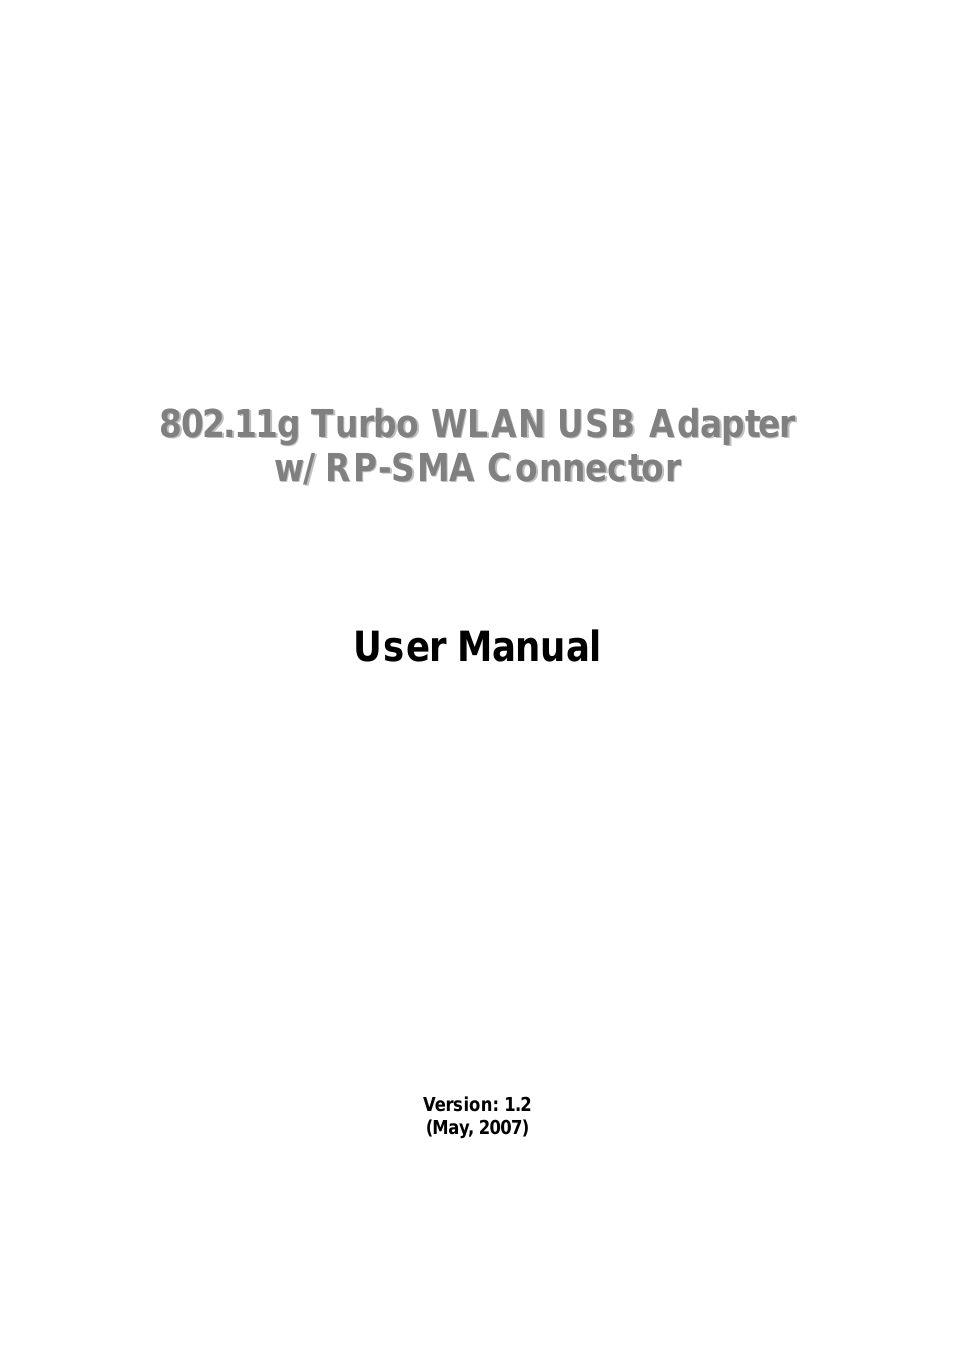 802.11g Turbo WLAN USB Adapter with RP-SMA Connector